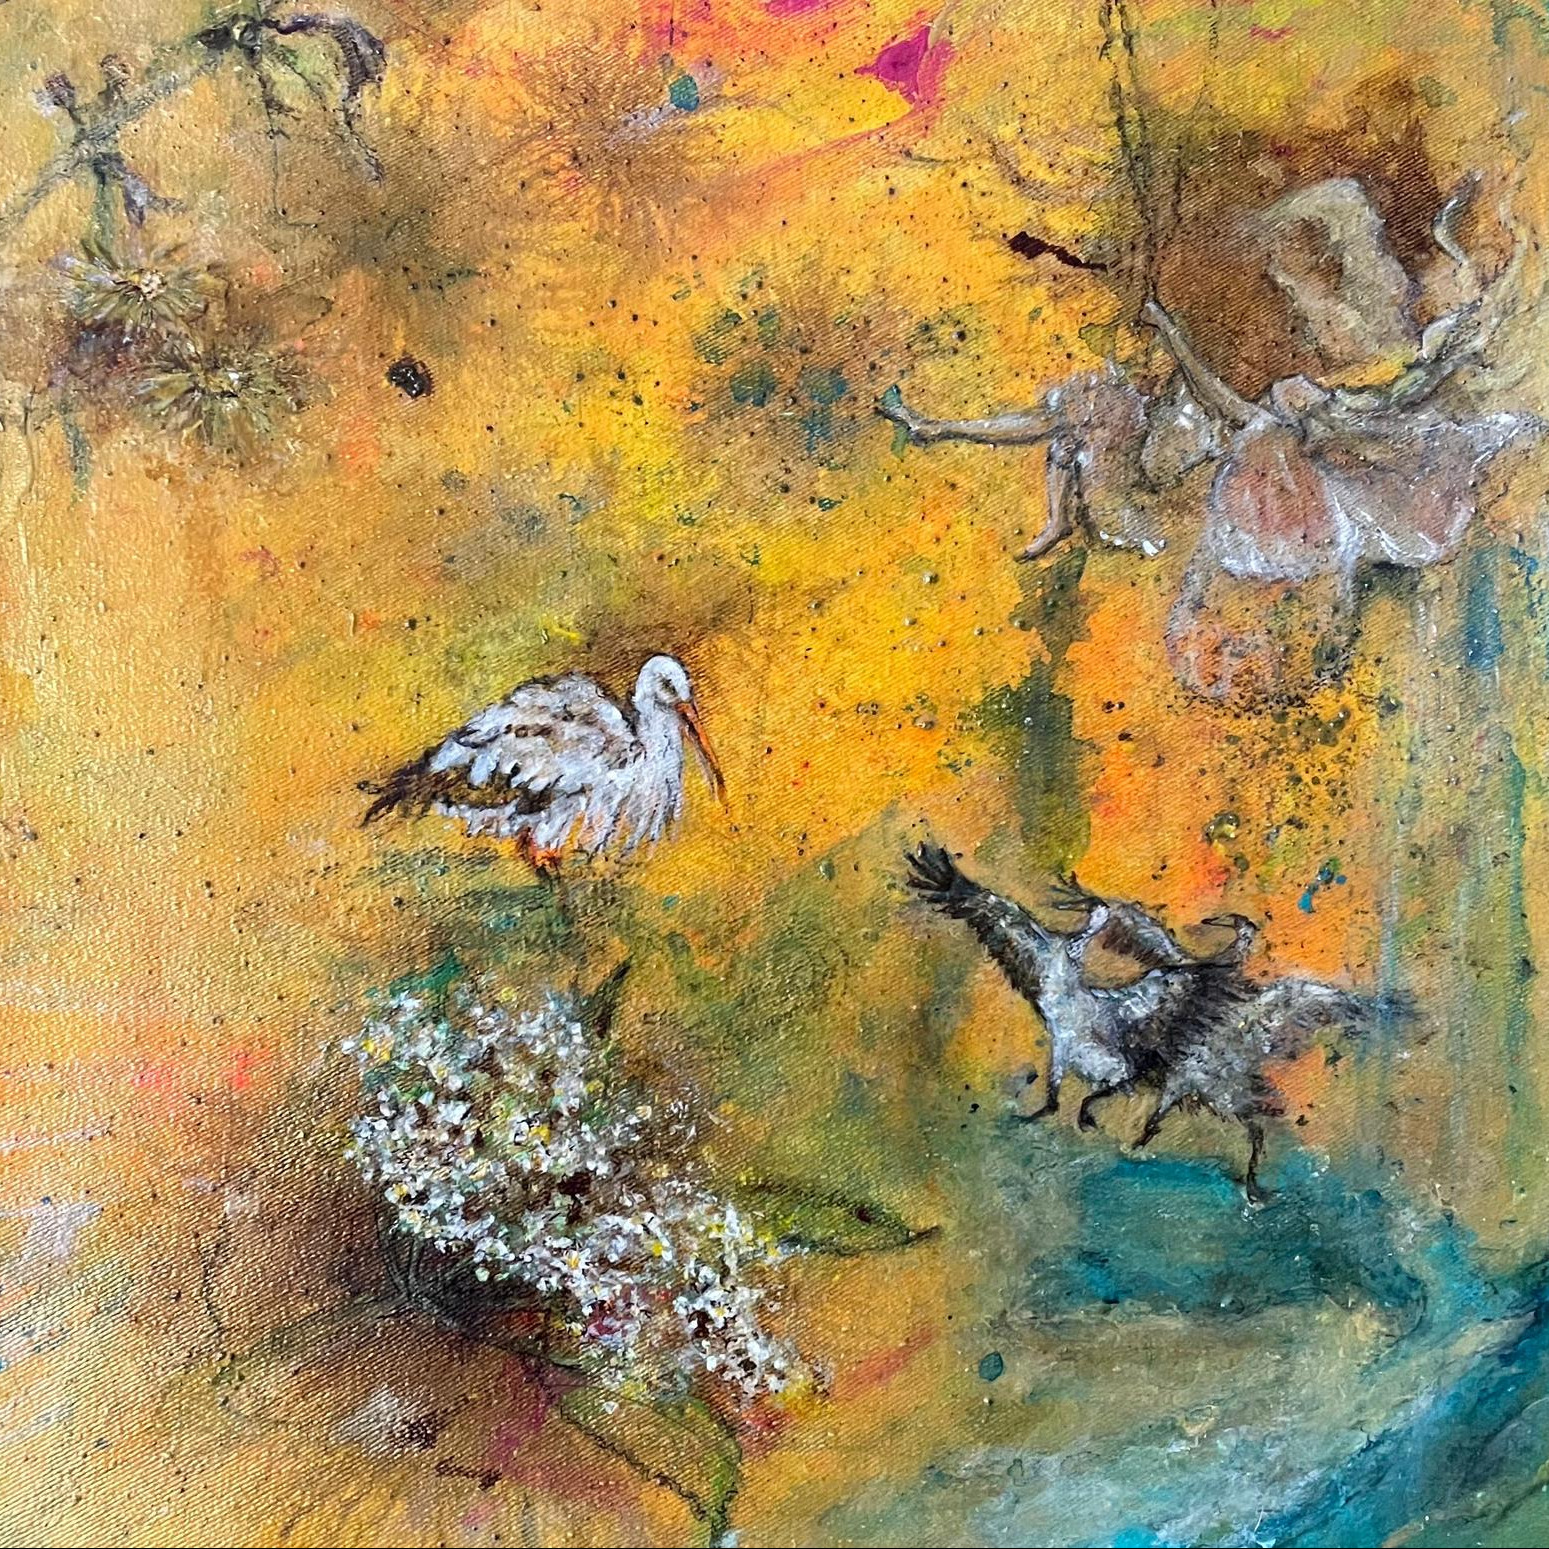 Andreja Soleil "Dance of the Cranes" (2021). Mixed Media. Acrylic, ink and charcoal on canvas. 30 x 30 cm